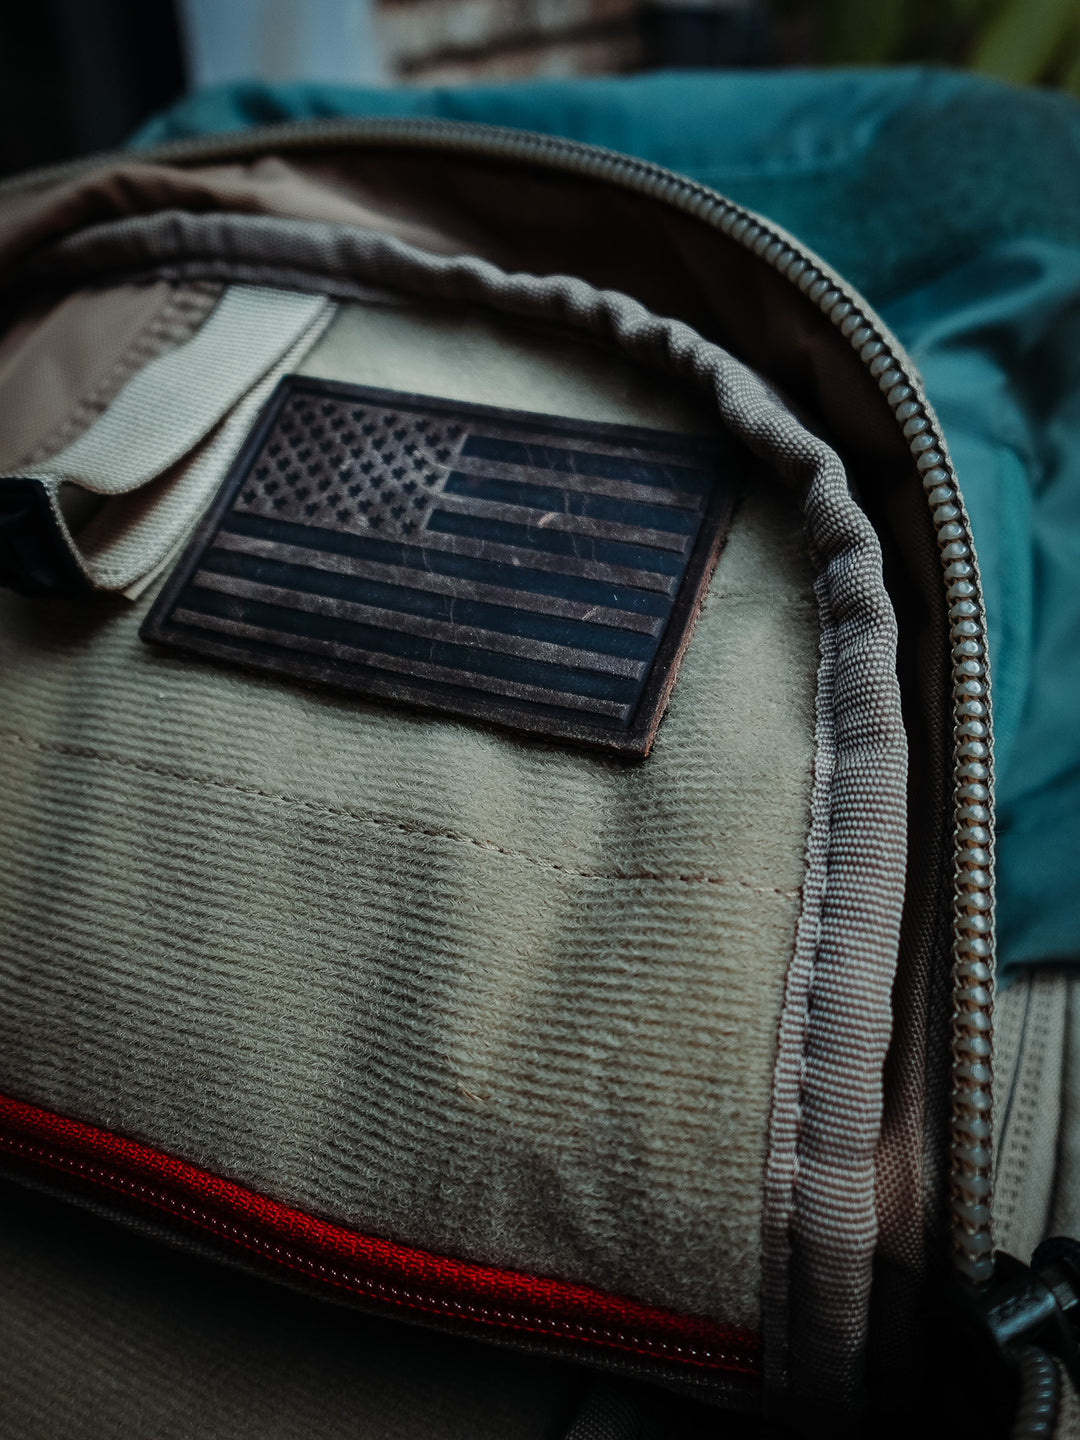 Leather American Flag Velcro Patch